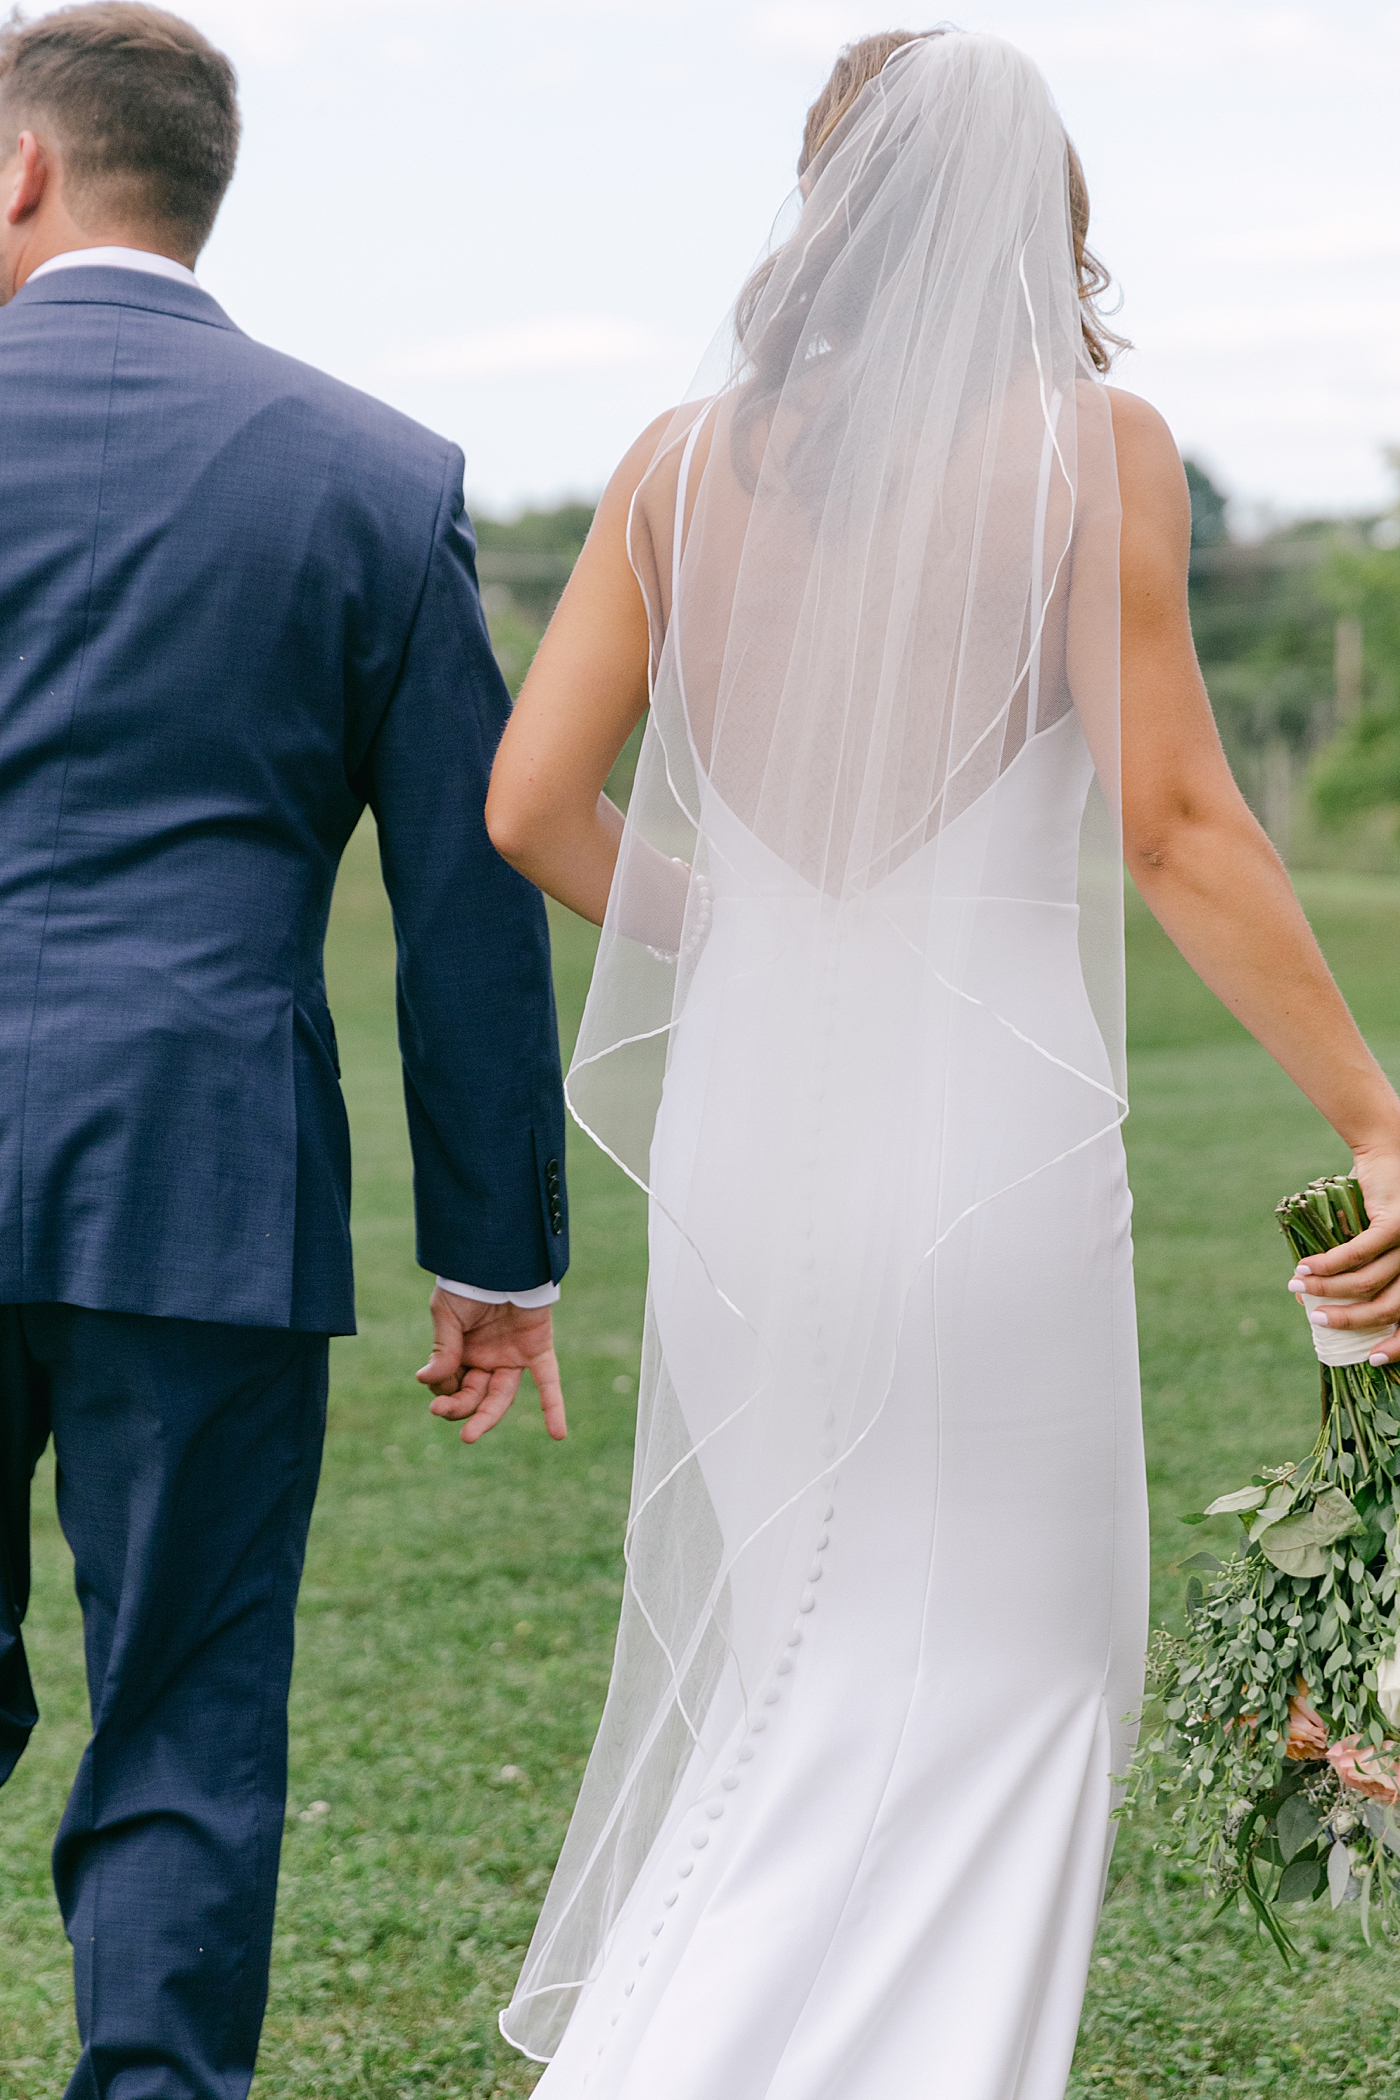 Bride and groom walking together after their ceremony | Image by Hope Helmuth Photography